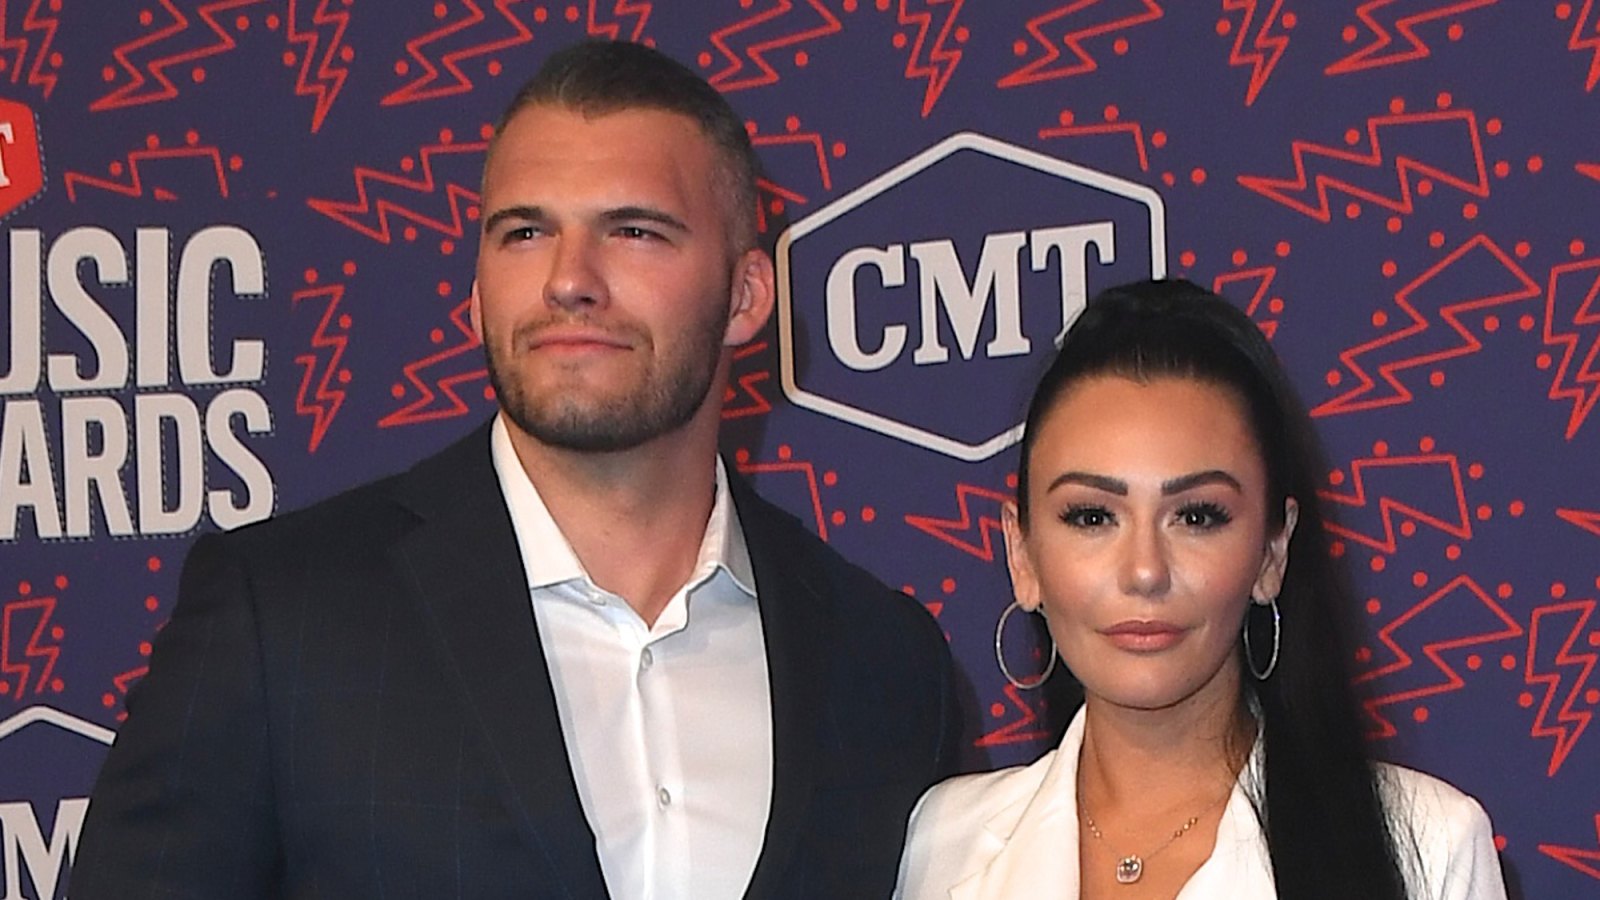 Jenni 'JWoww' Farley and Zack Carpinello Are Back Together After Brief Split